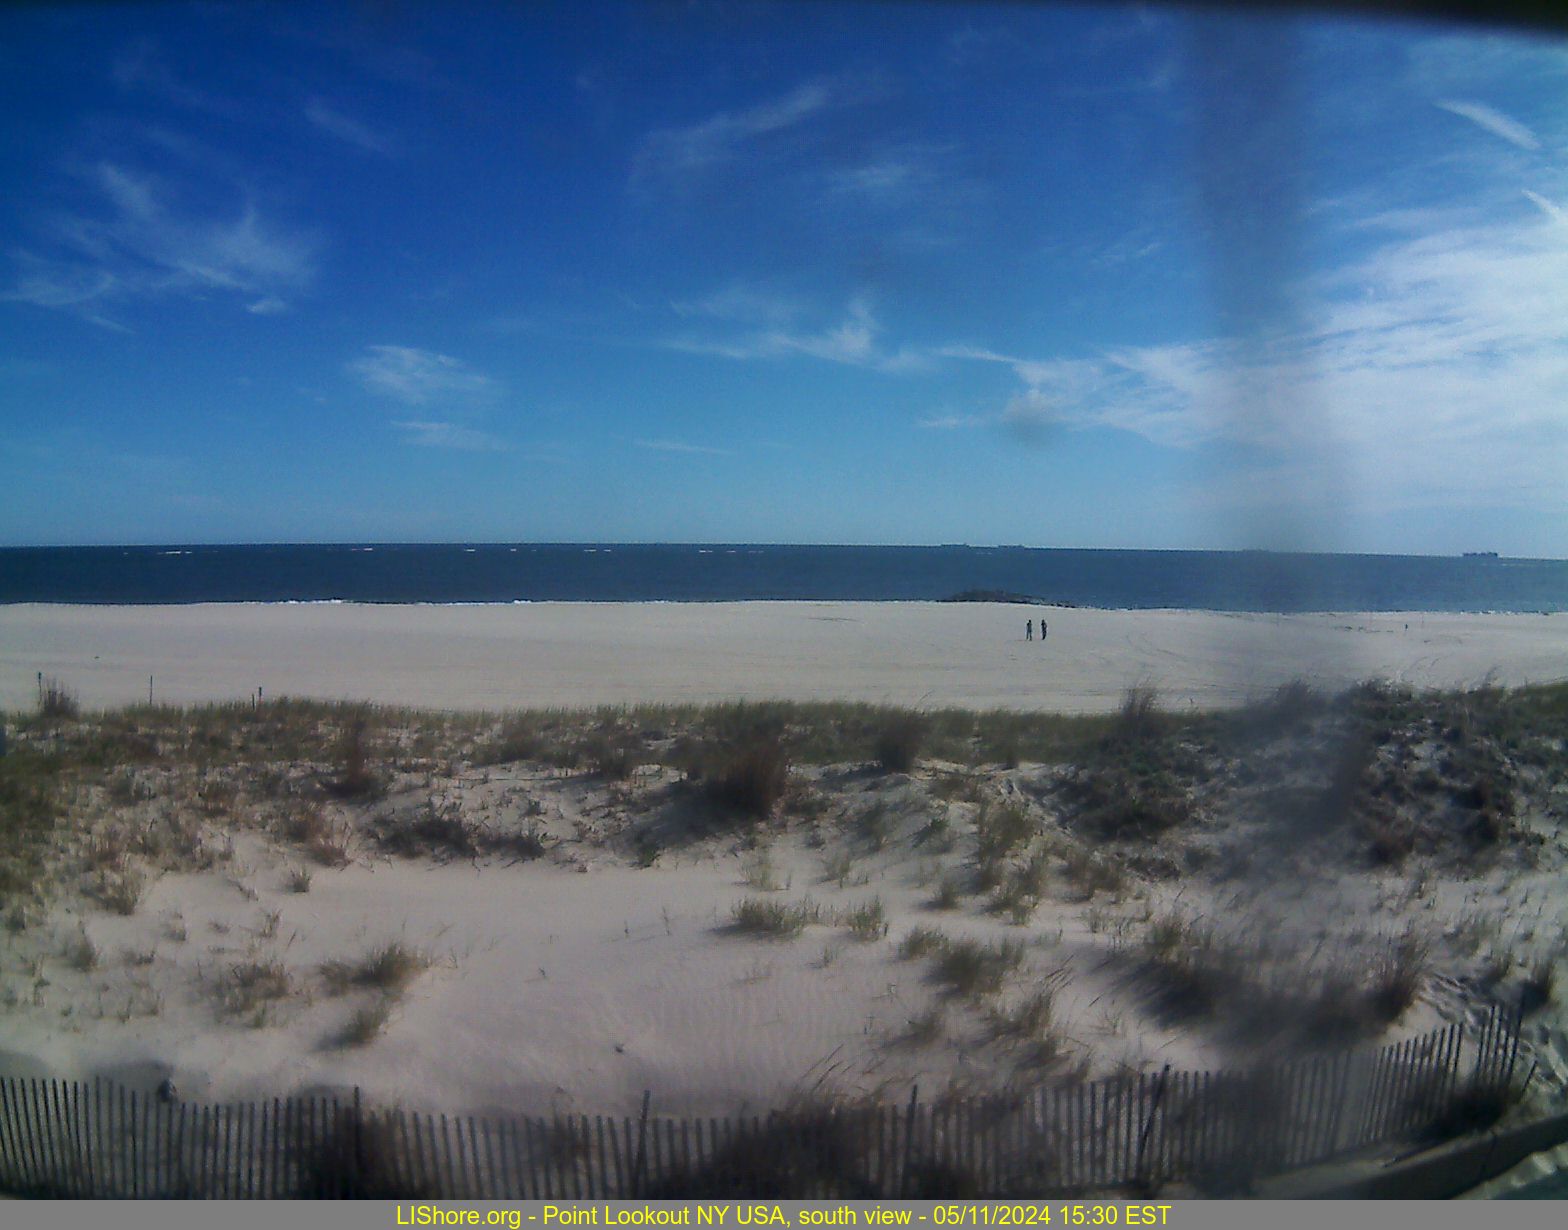 Point Lookout NY USA - new camera south view